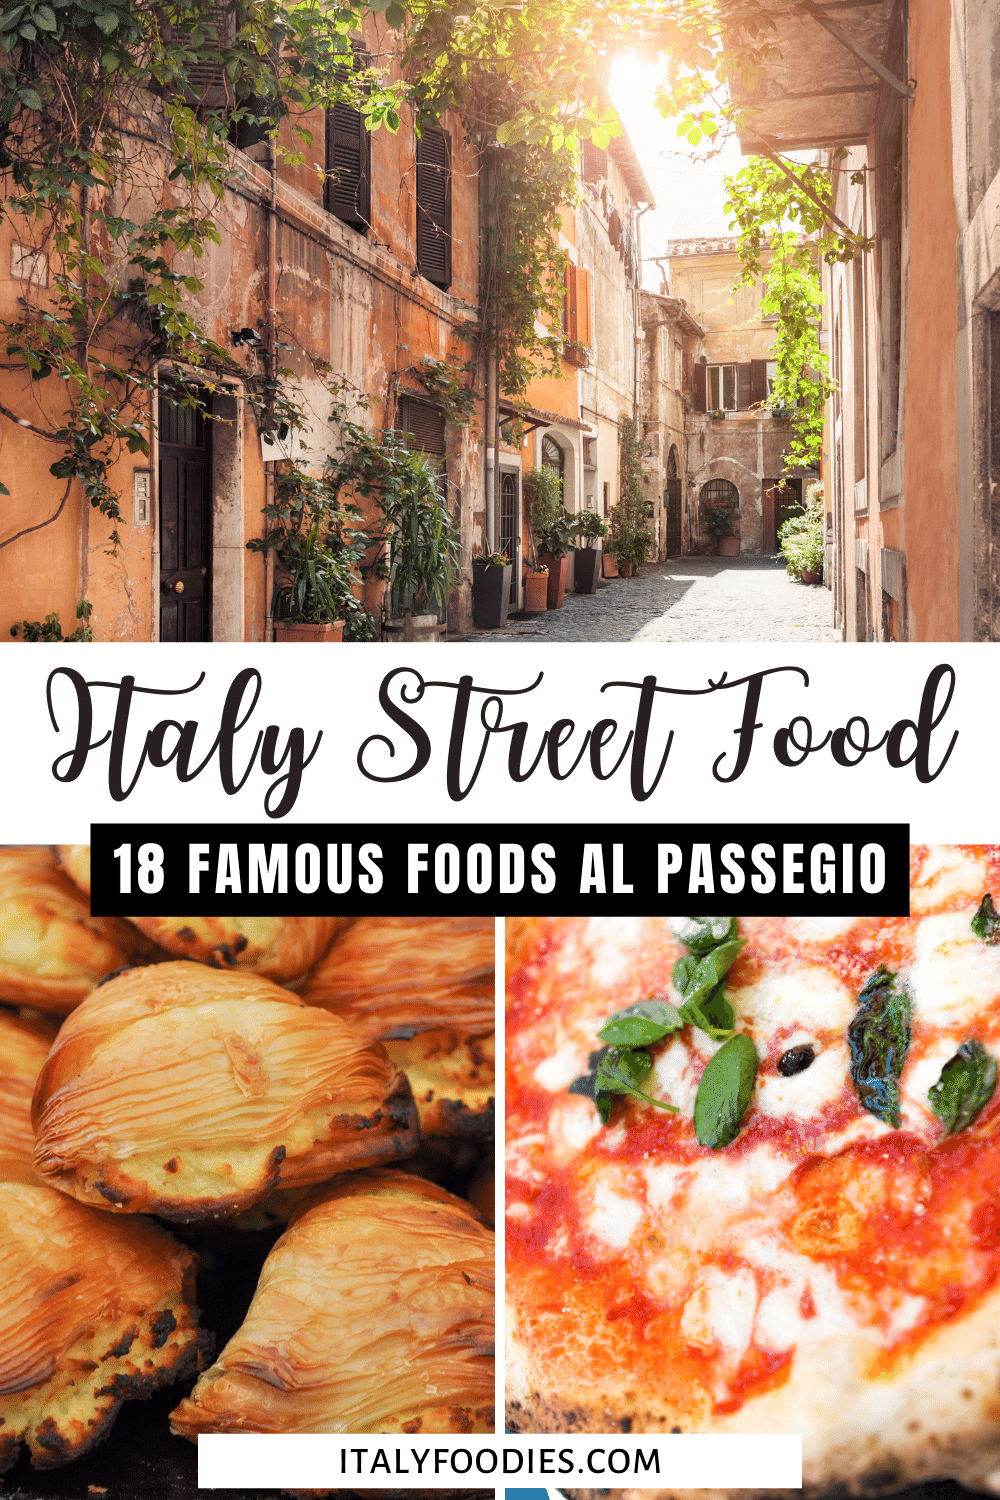 Street Food in Italy: 18 Famous Foods to Grab and Go